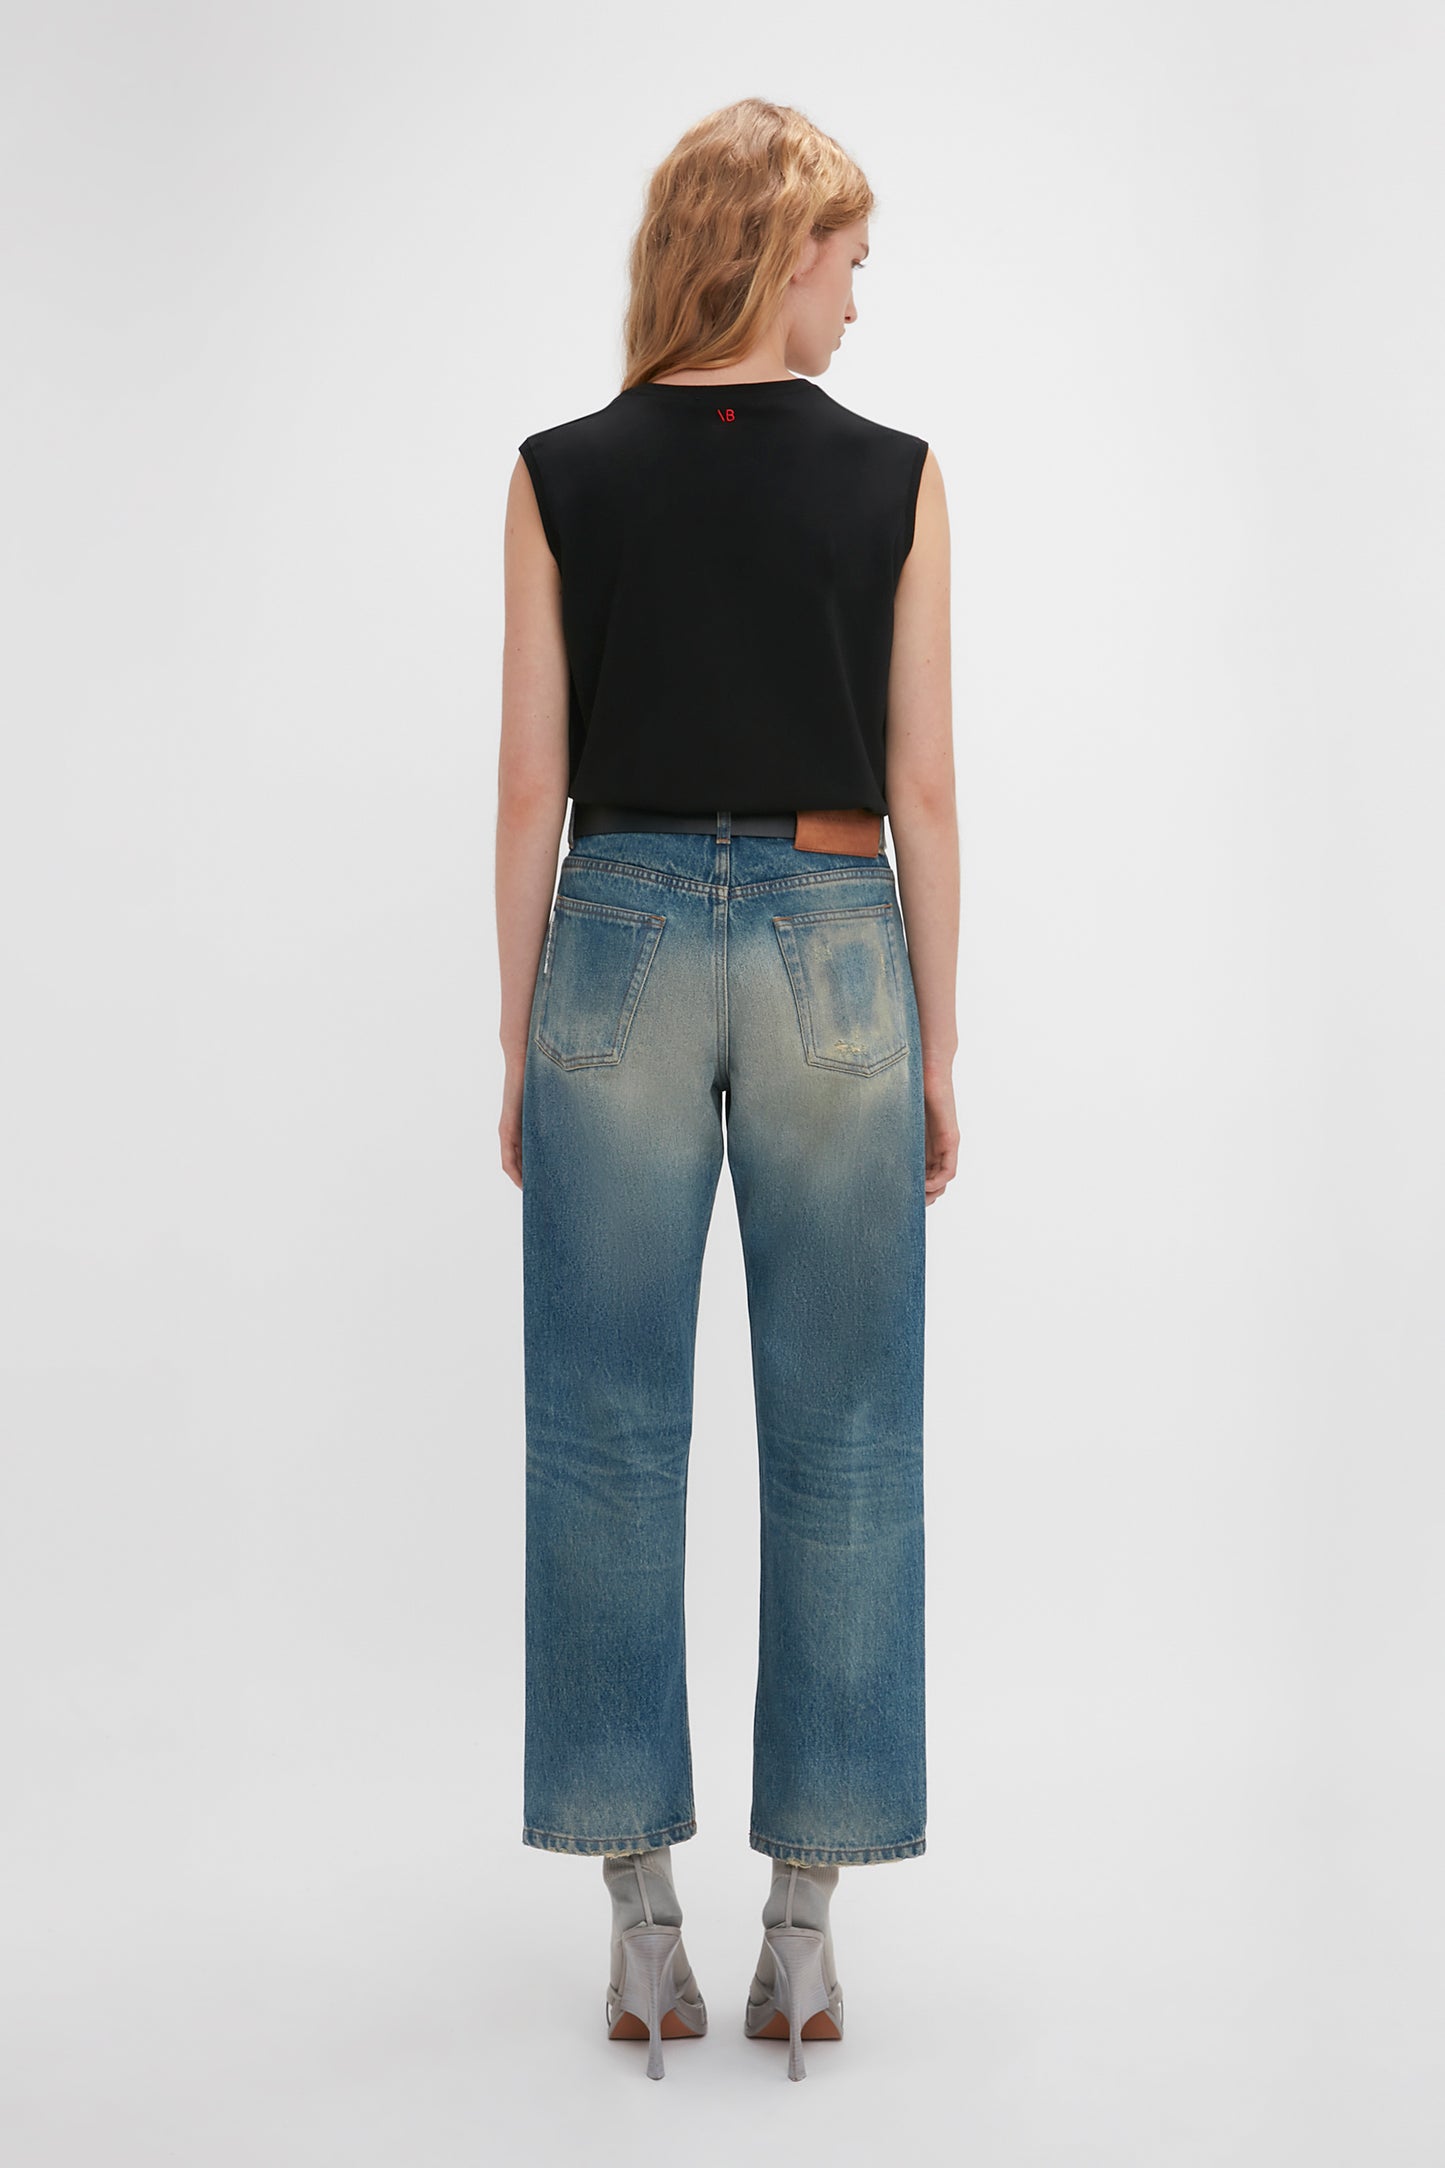 Woman standing with her back to the camera, wearing a black sleeveless top and blue Victoria Beckham Relaxed Straight Leg Jeans in Antique Indigo Wash, against a white background.